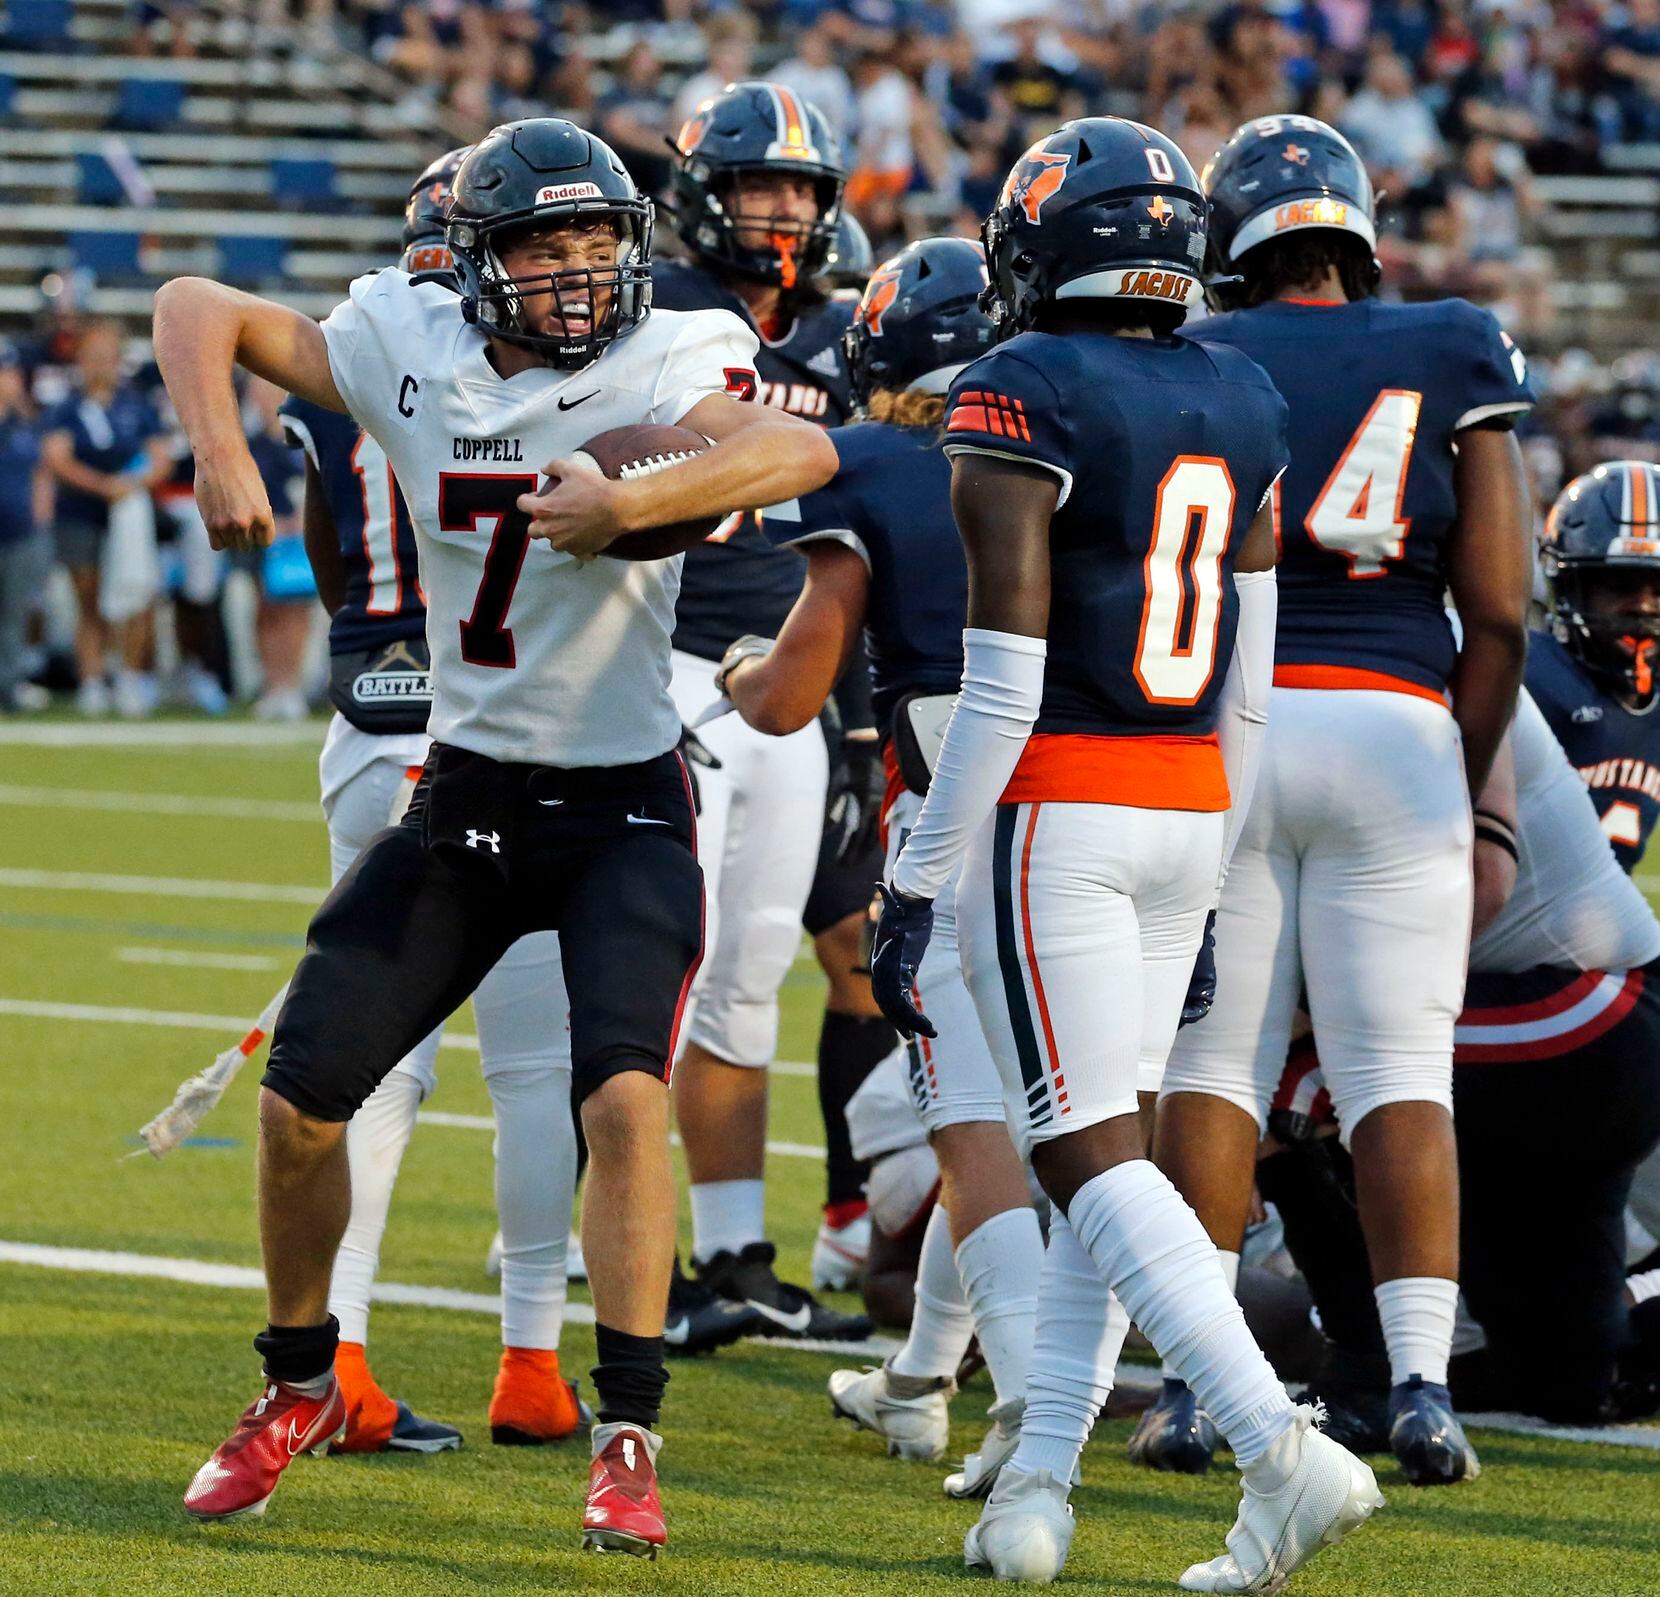 Coppell QB Jack Fishpaw (7) celebrates after scoring a touchdown during the first half of a...